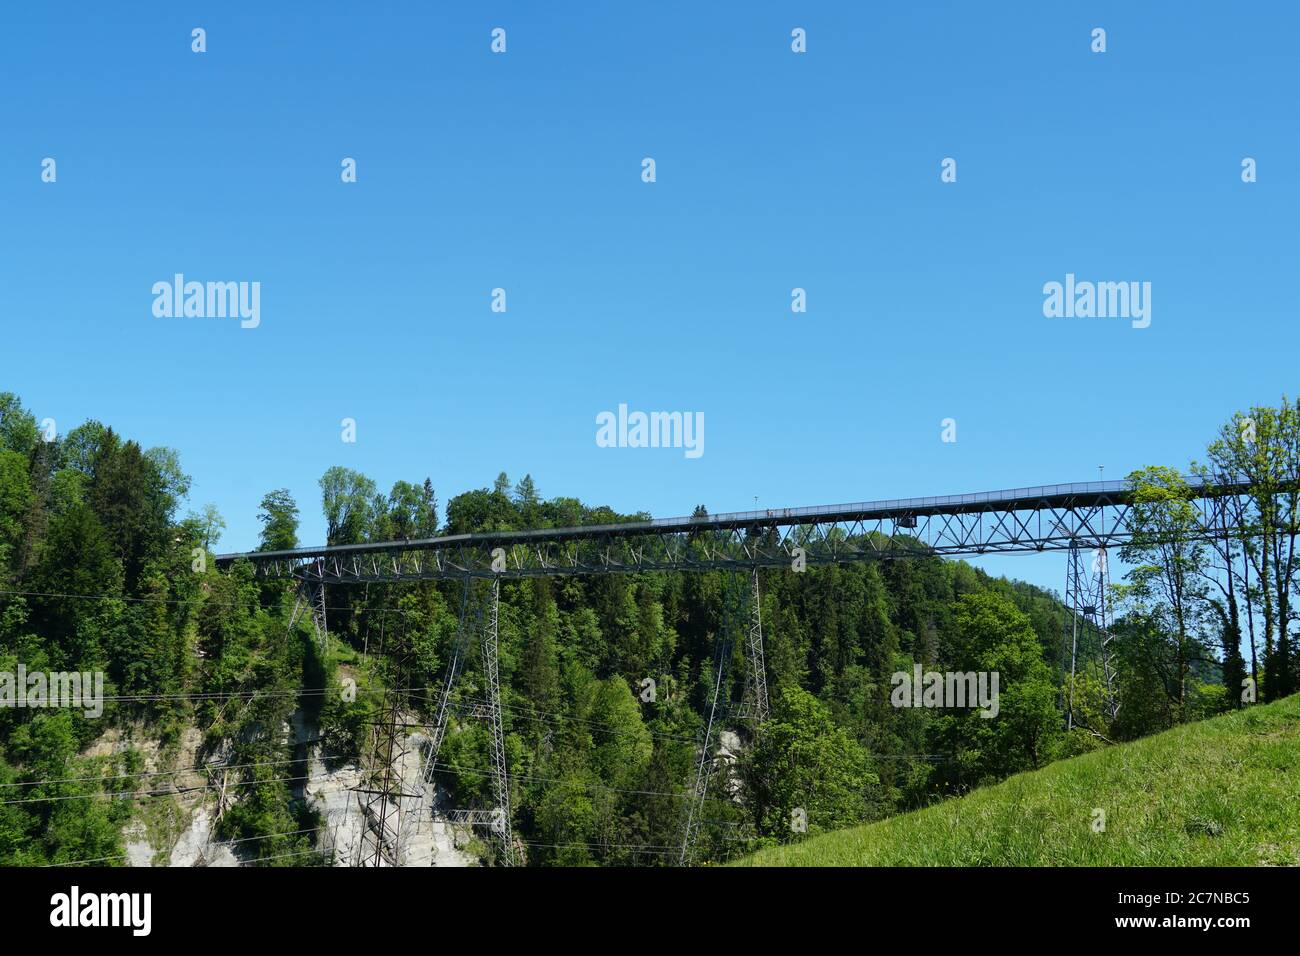 A suspension bridge joining two hills separated by a ravine or abbys on St. Gallen Bridge hiking trail in Eastern Switzerland. Stock Photo